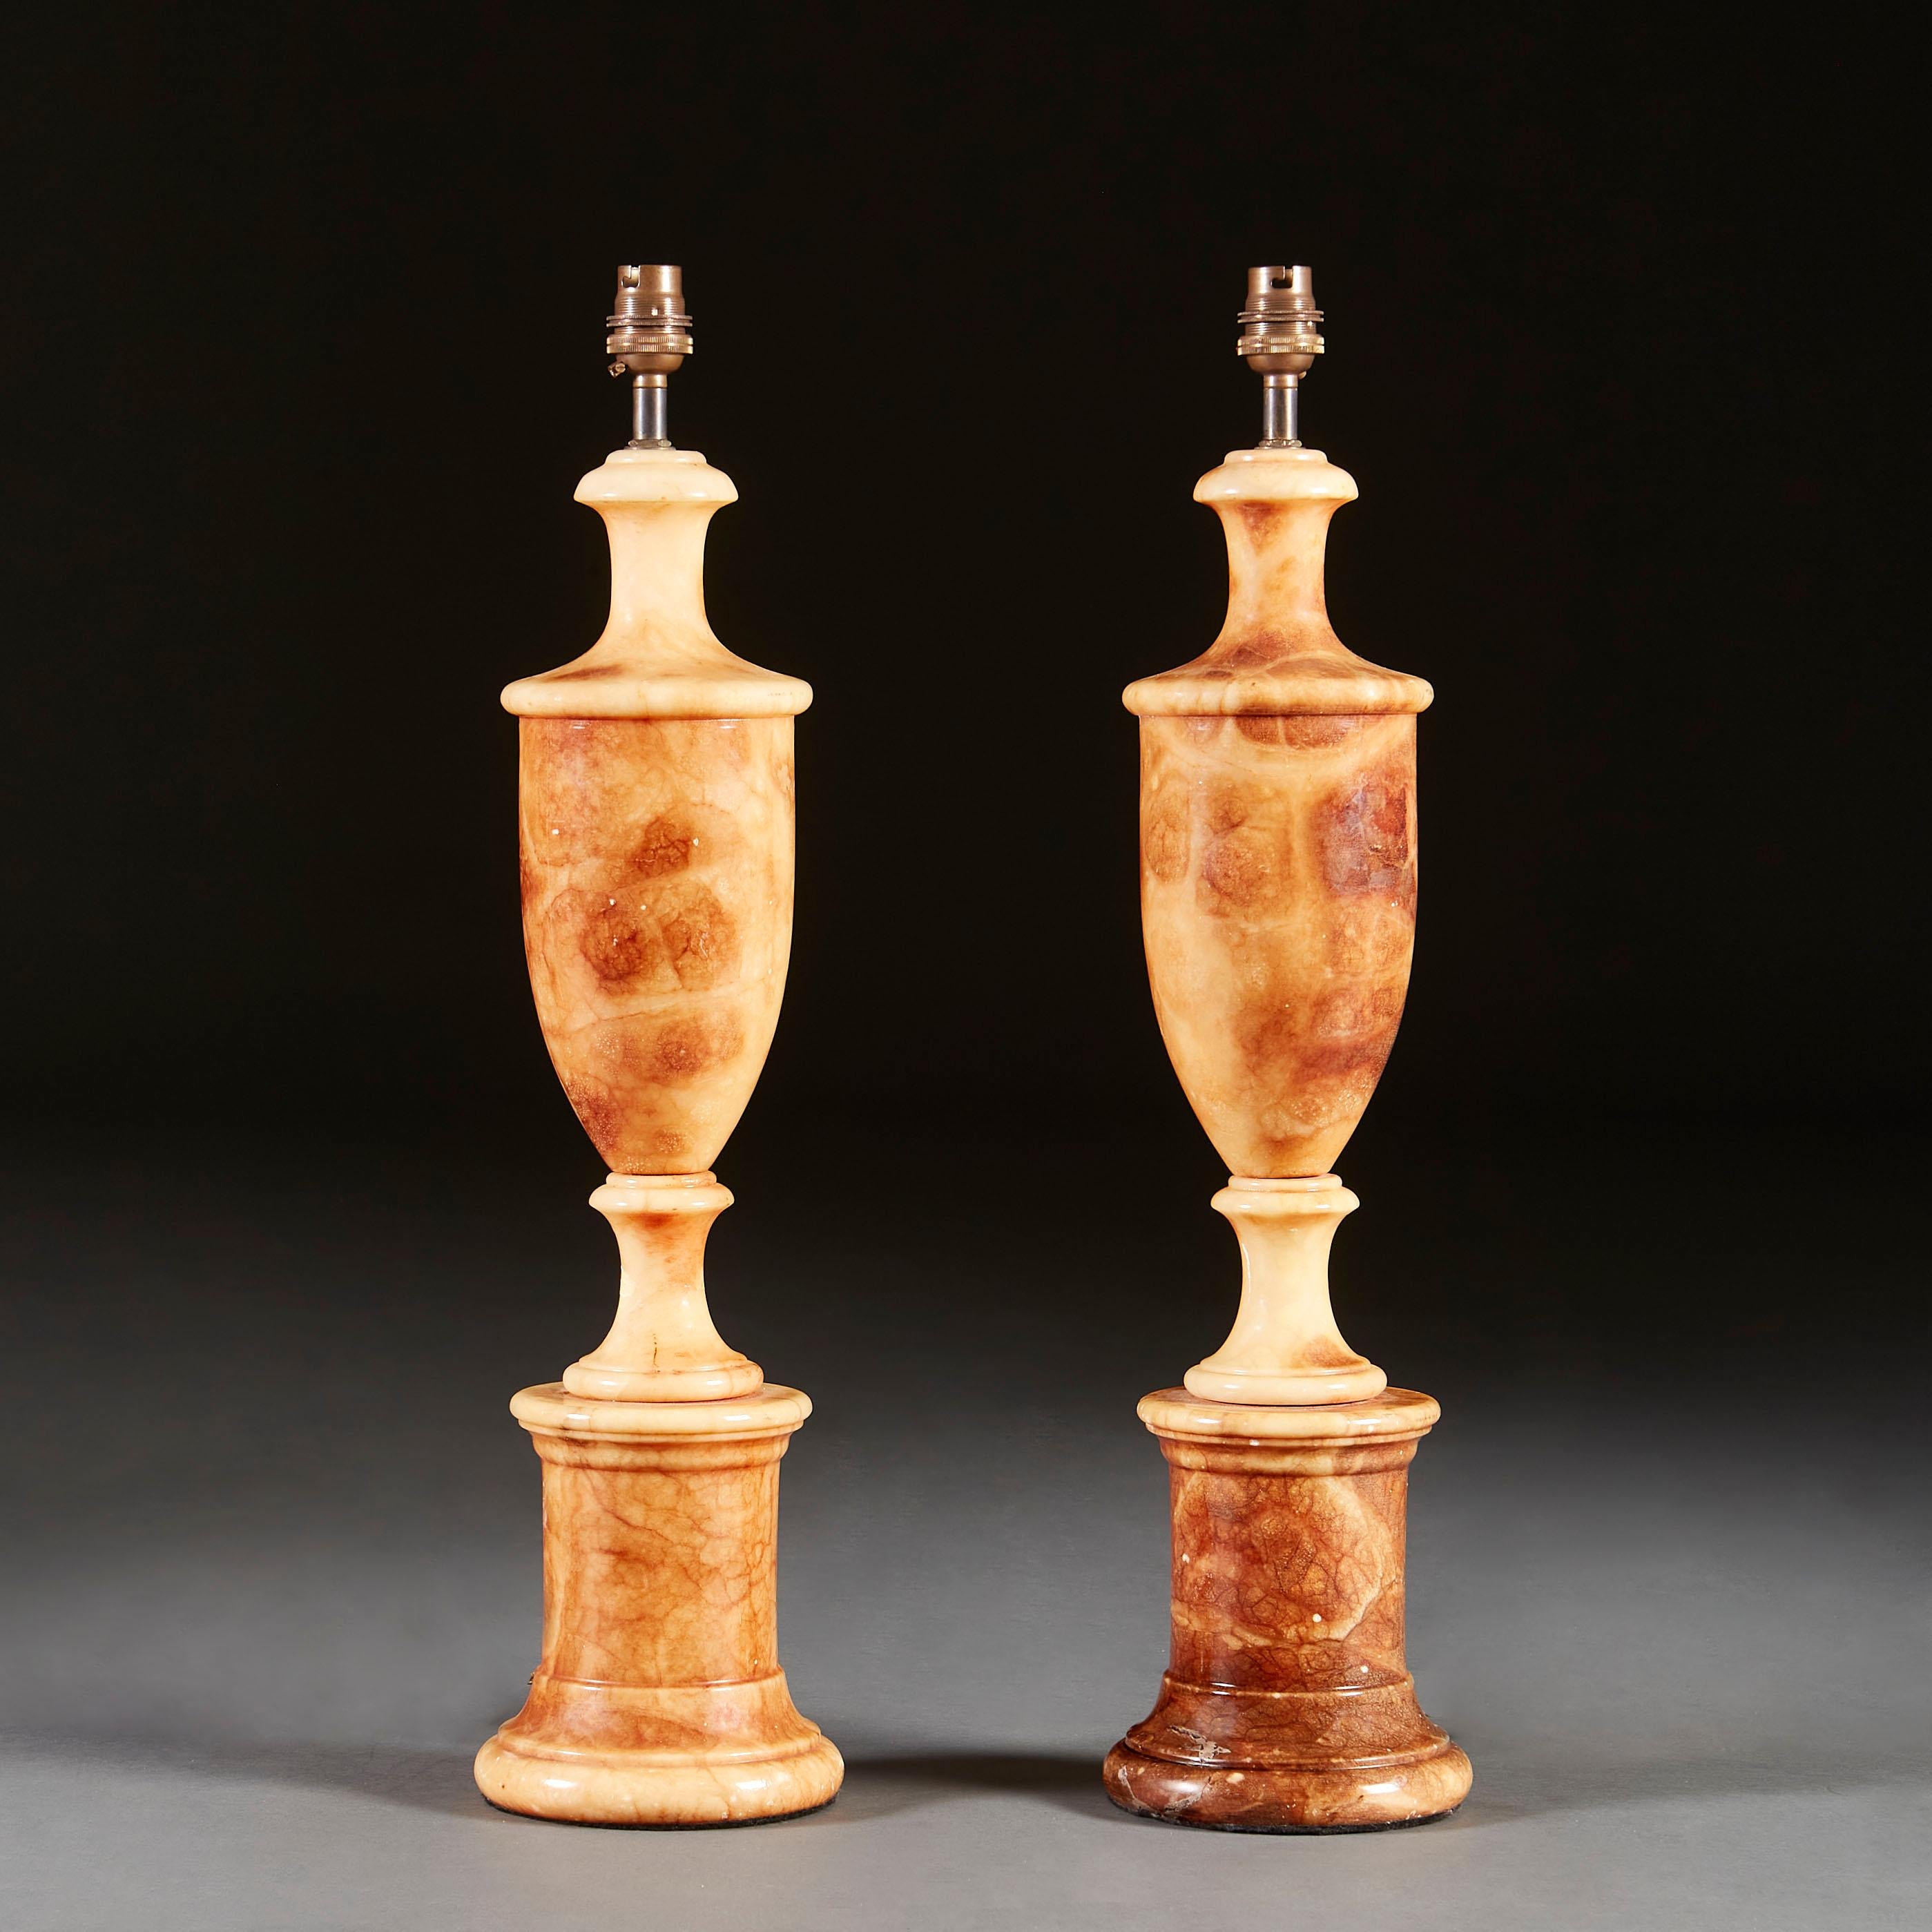 A pair of late nineteenth century marble column lamps of turned urn form, on circular plinth bases.

Please note that these lamps are currently wired for the UK, and that the lampshade is not included. Please enquire about rewiring services.